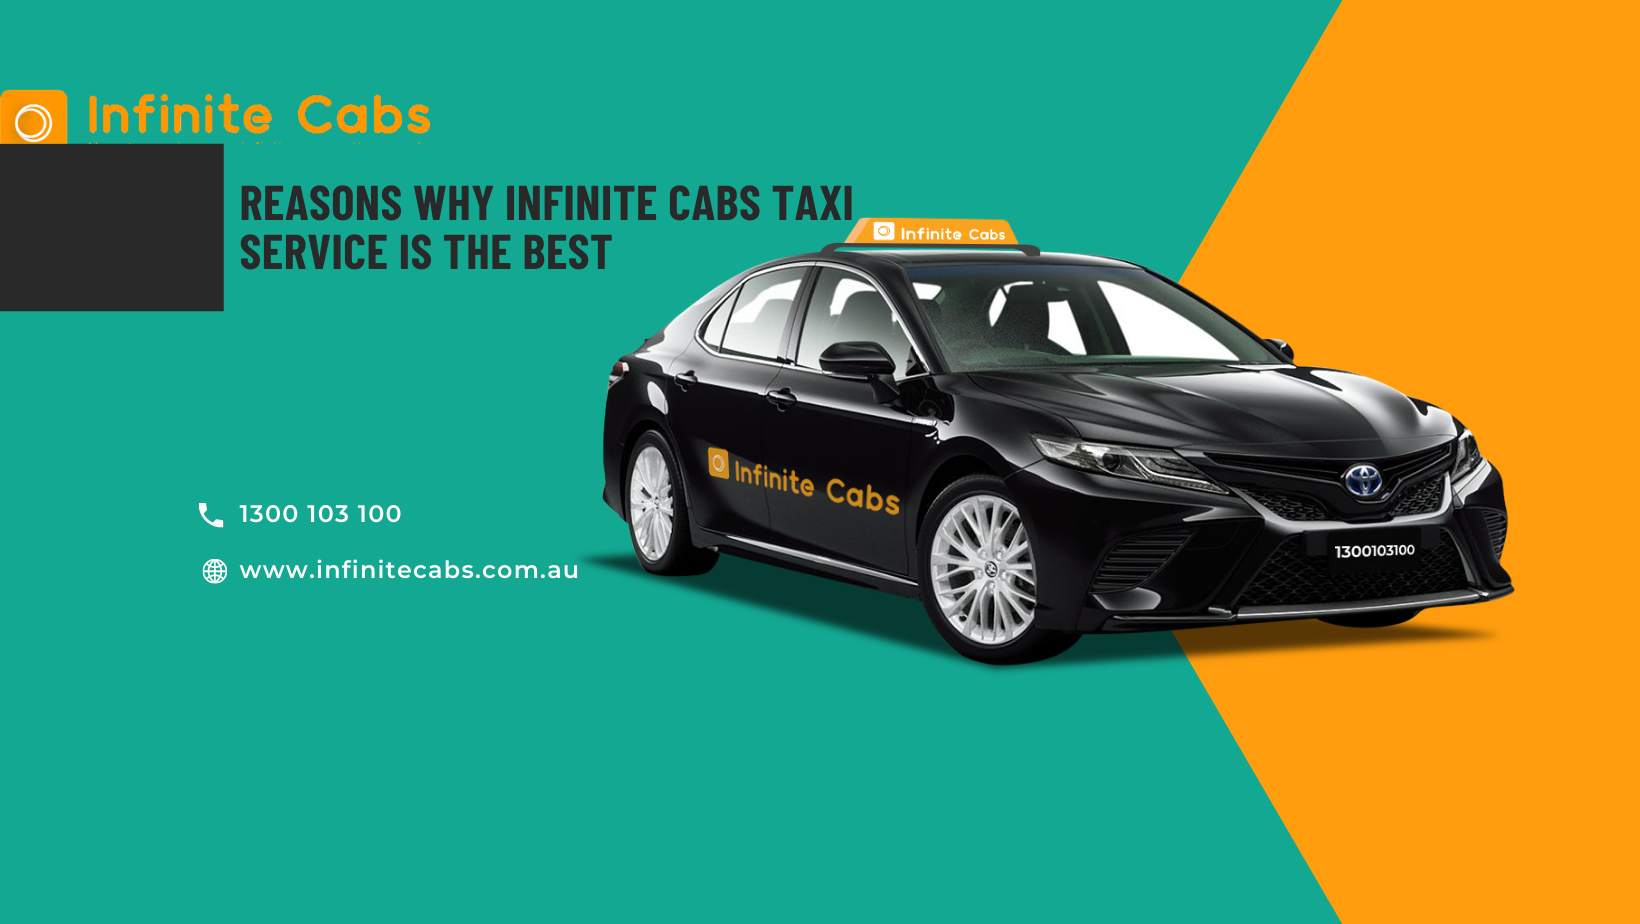 Reasons Why Infinite Cabs Taxi Service Is the Best